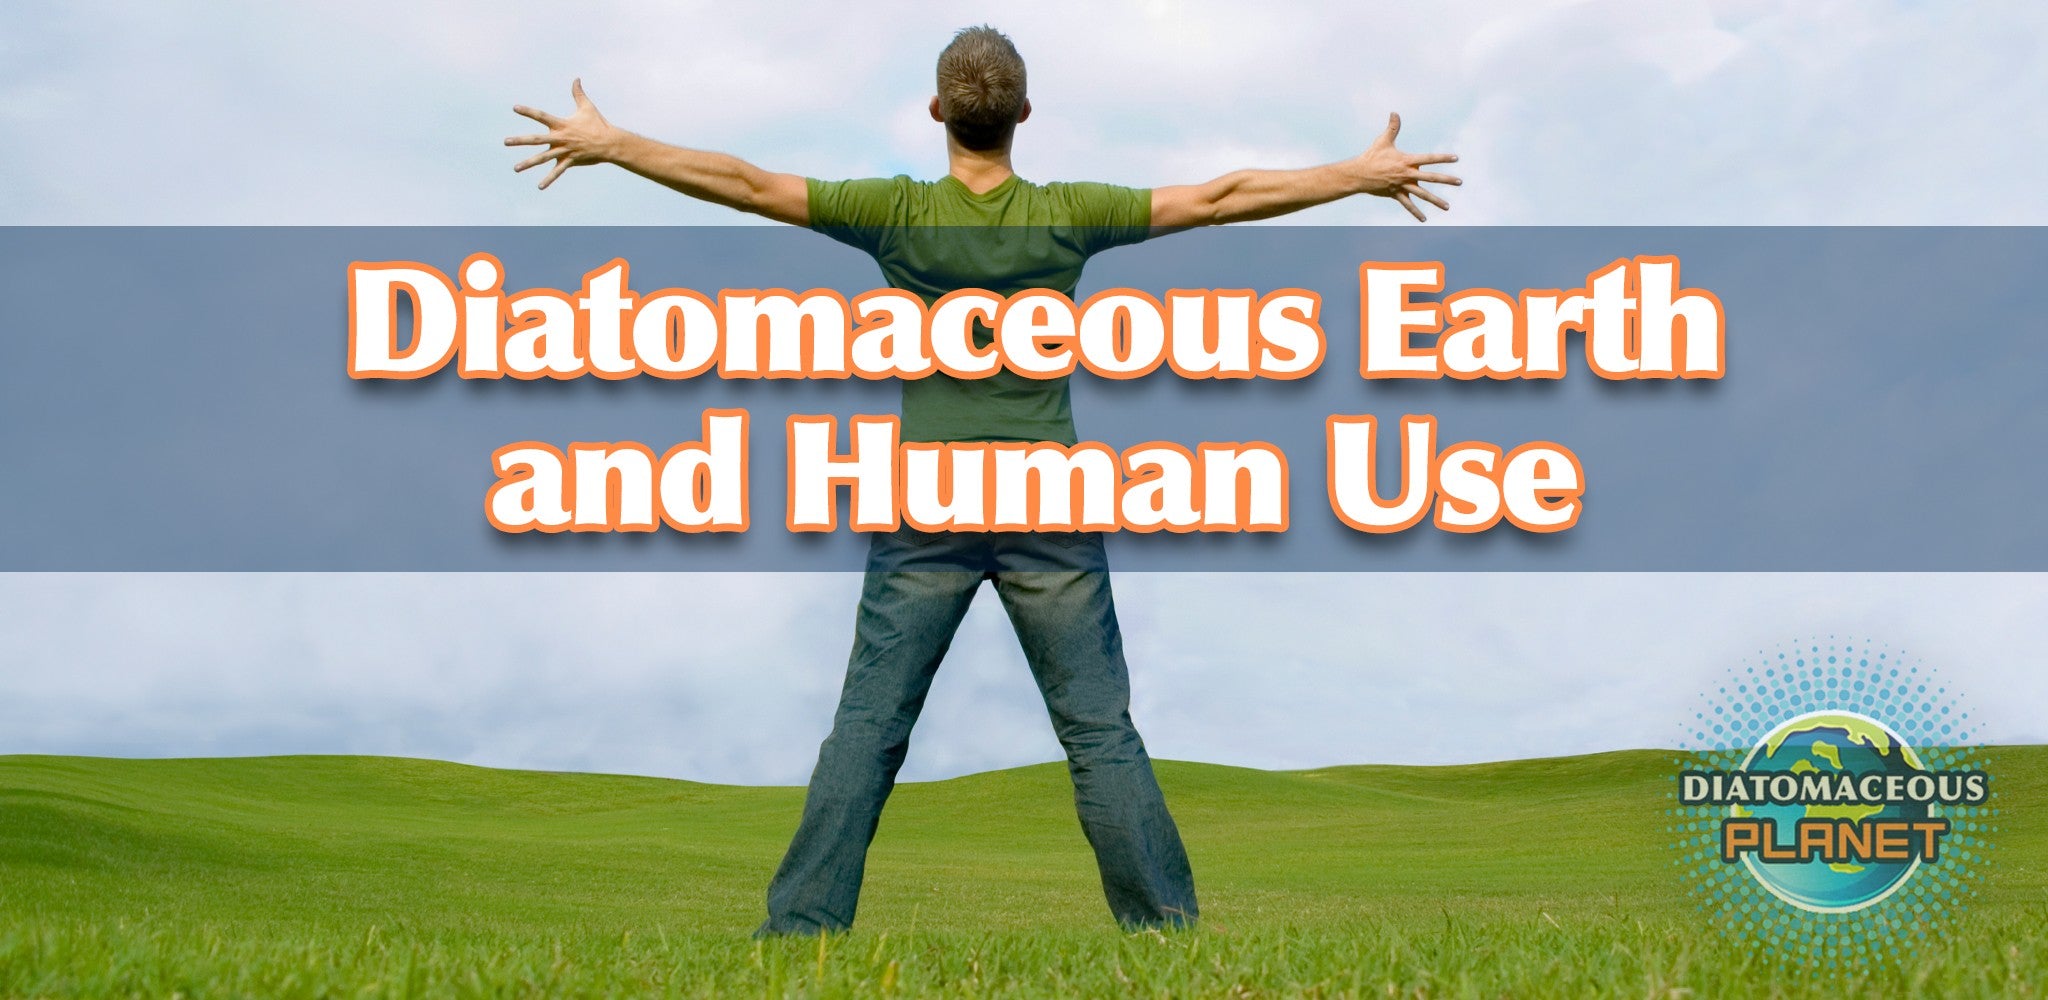 Food Grade Diatomaceous Earth for Human Uses.